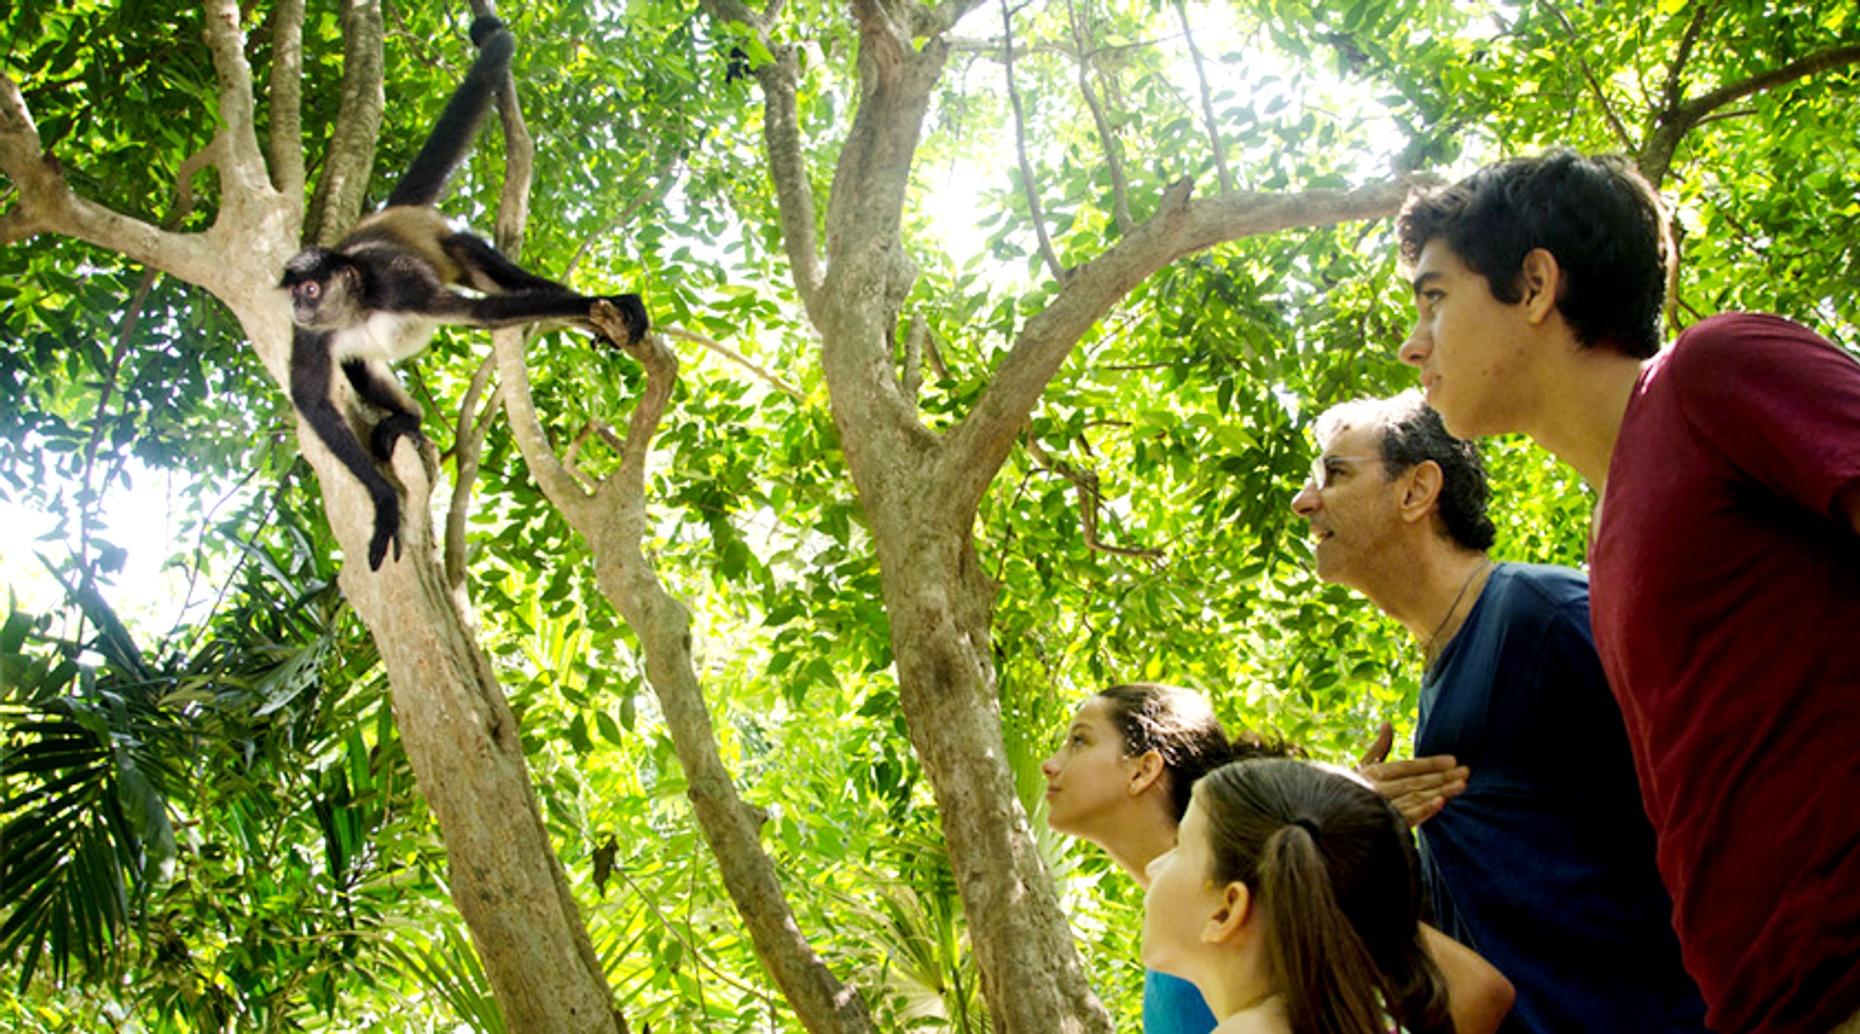 Guided Interactive Zoo Visit in Cancun